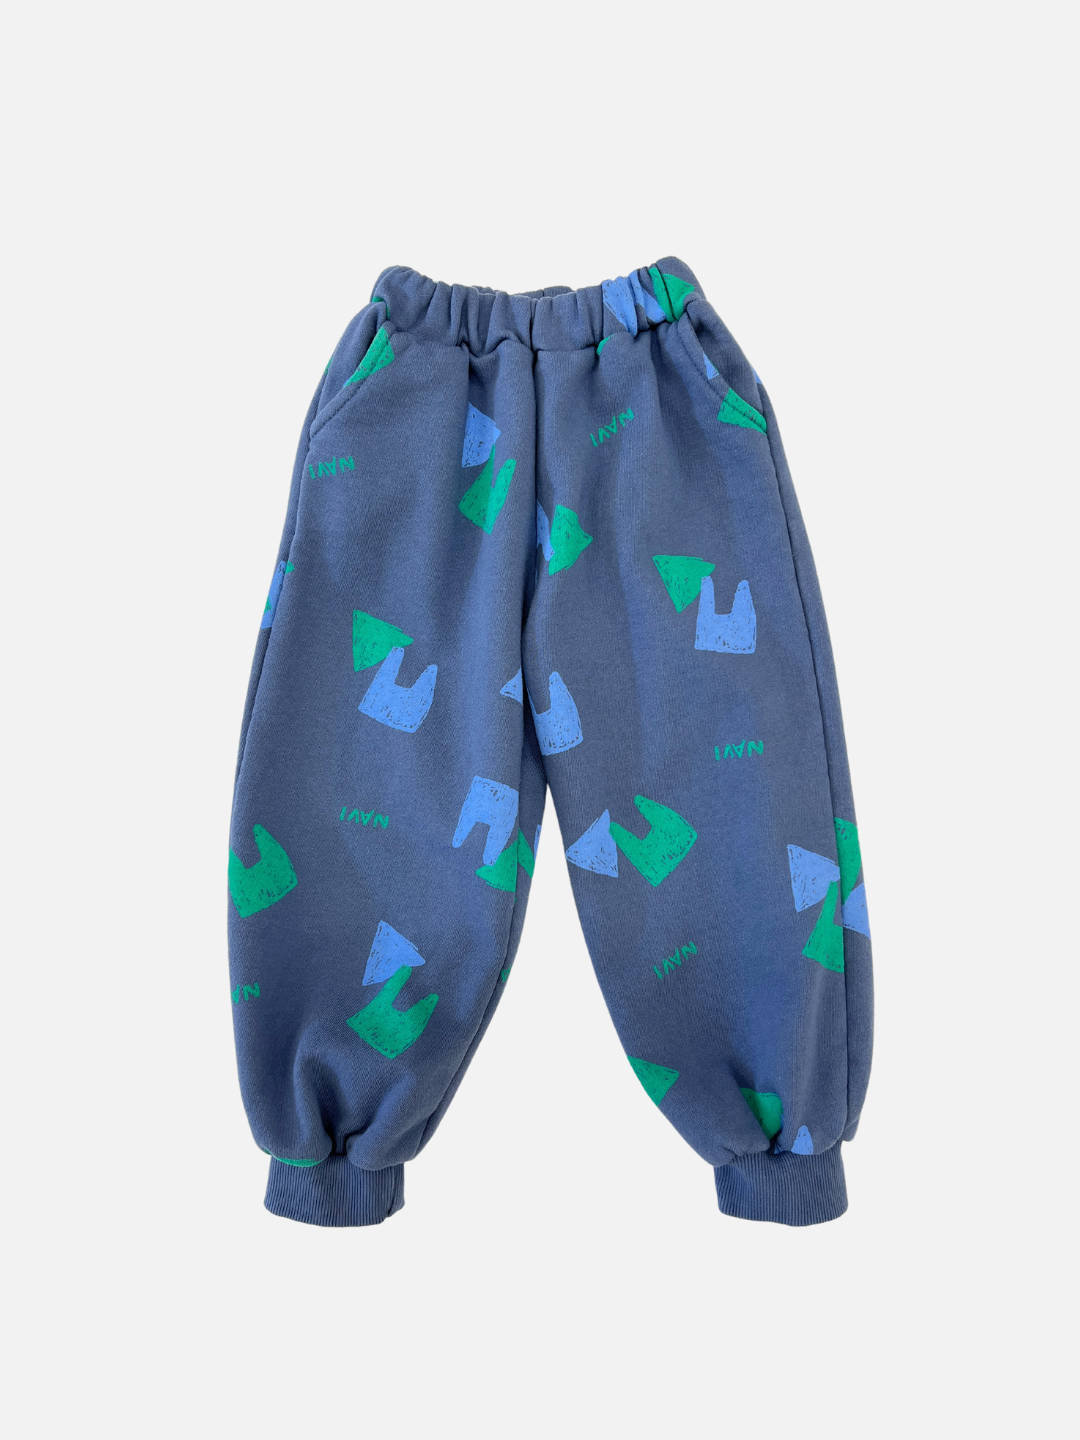 Vintage Blue | Front view of kids blue sweatpants with an all over pattern of green and blue shapes and the brand name Navi.